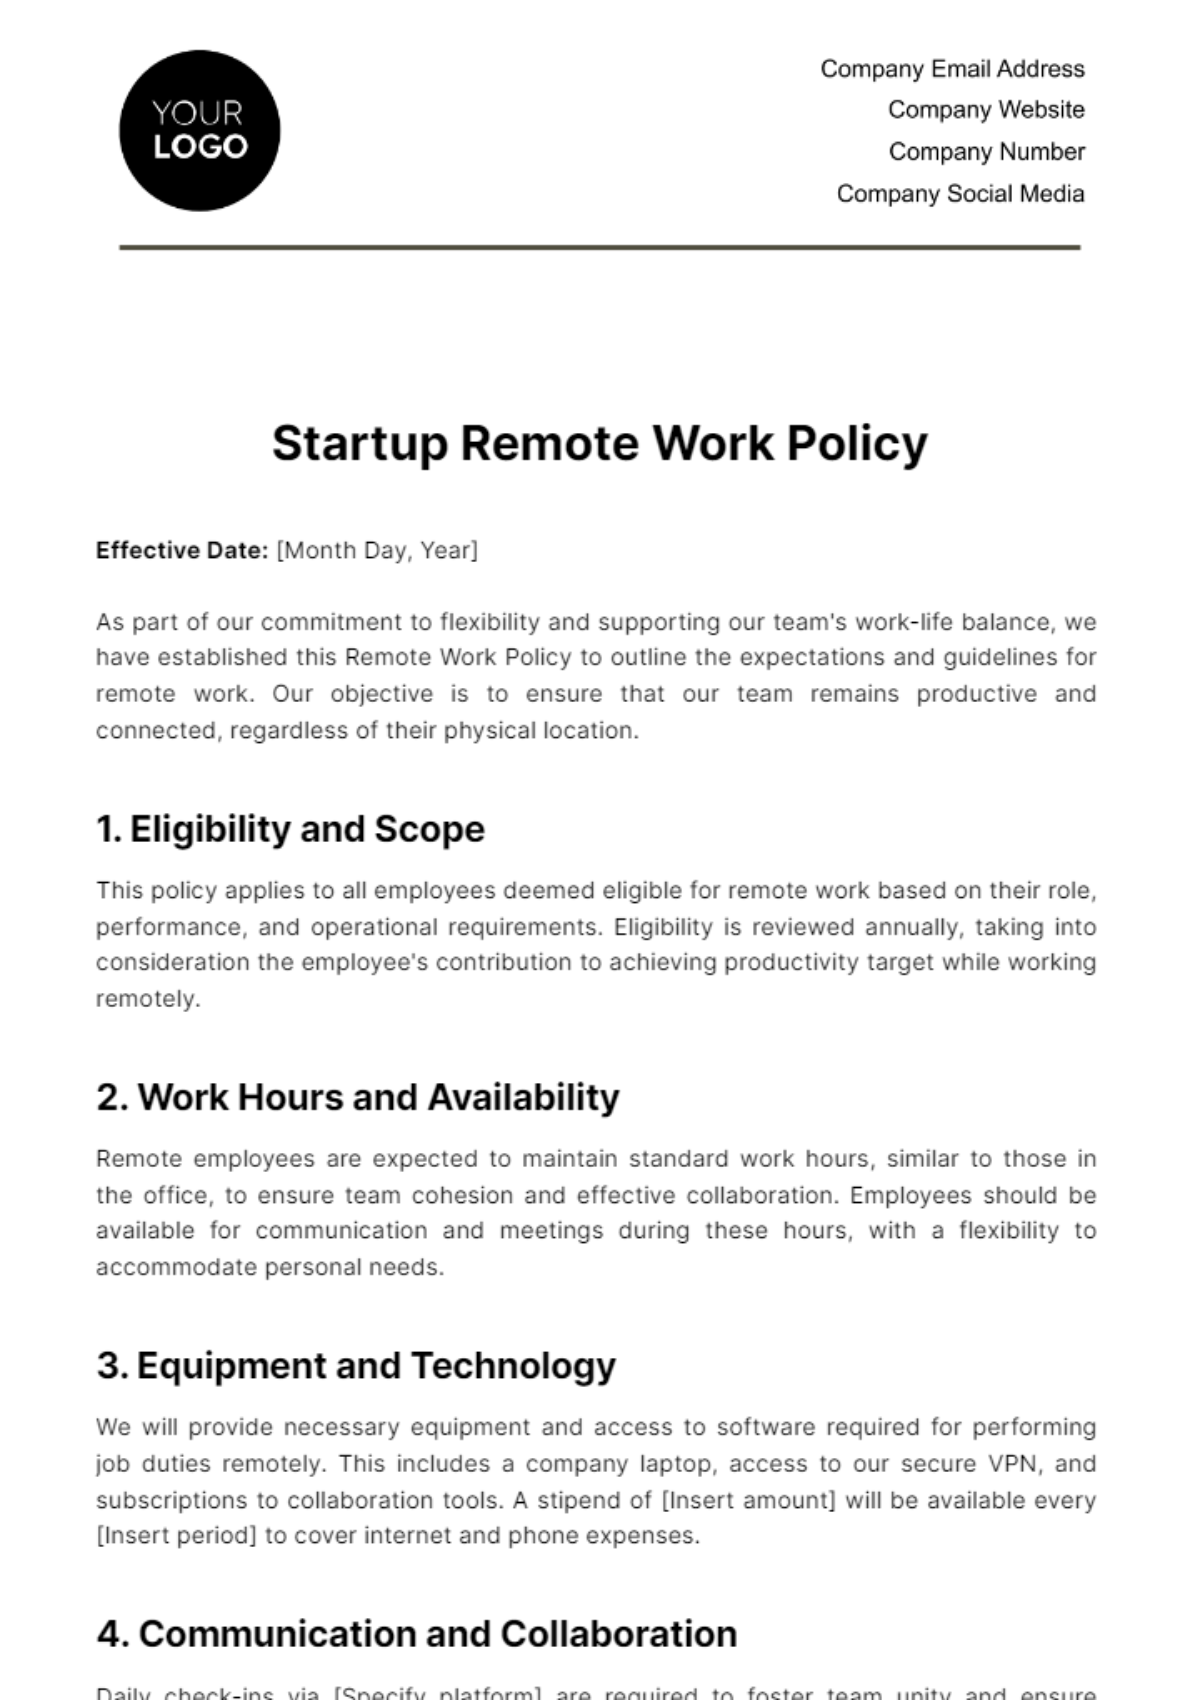 Free Startup Remote Work Policy Template